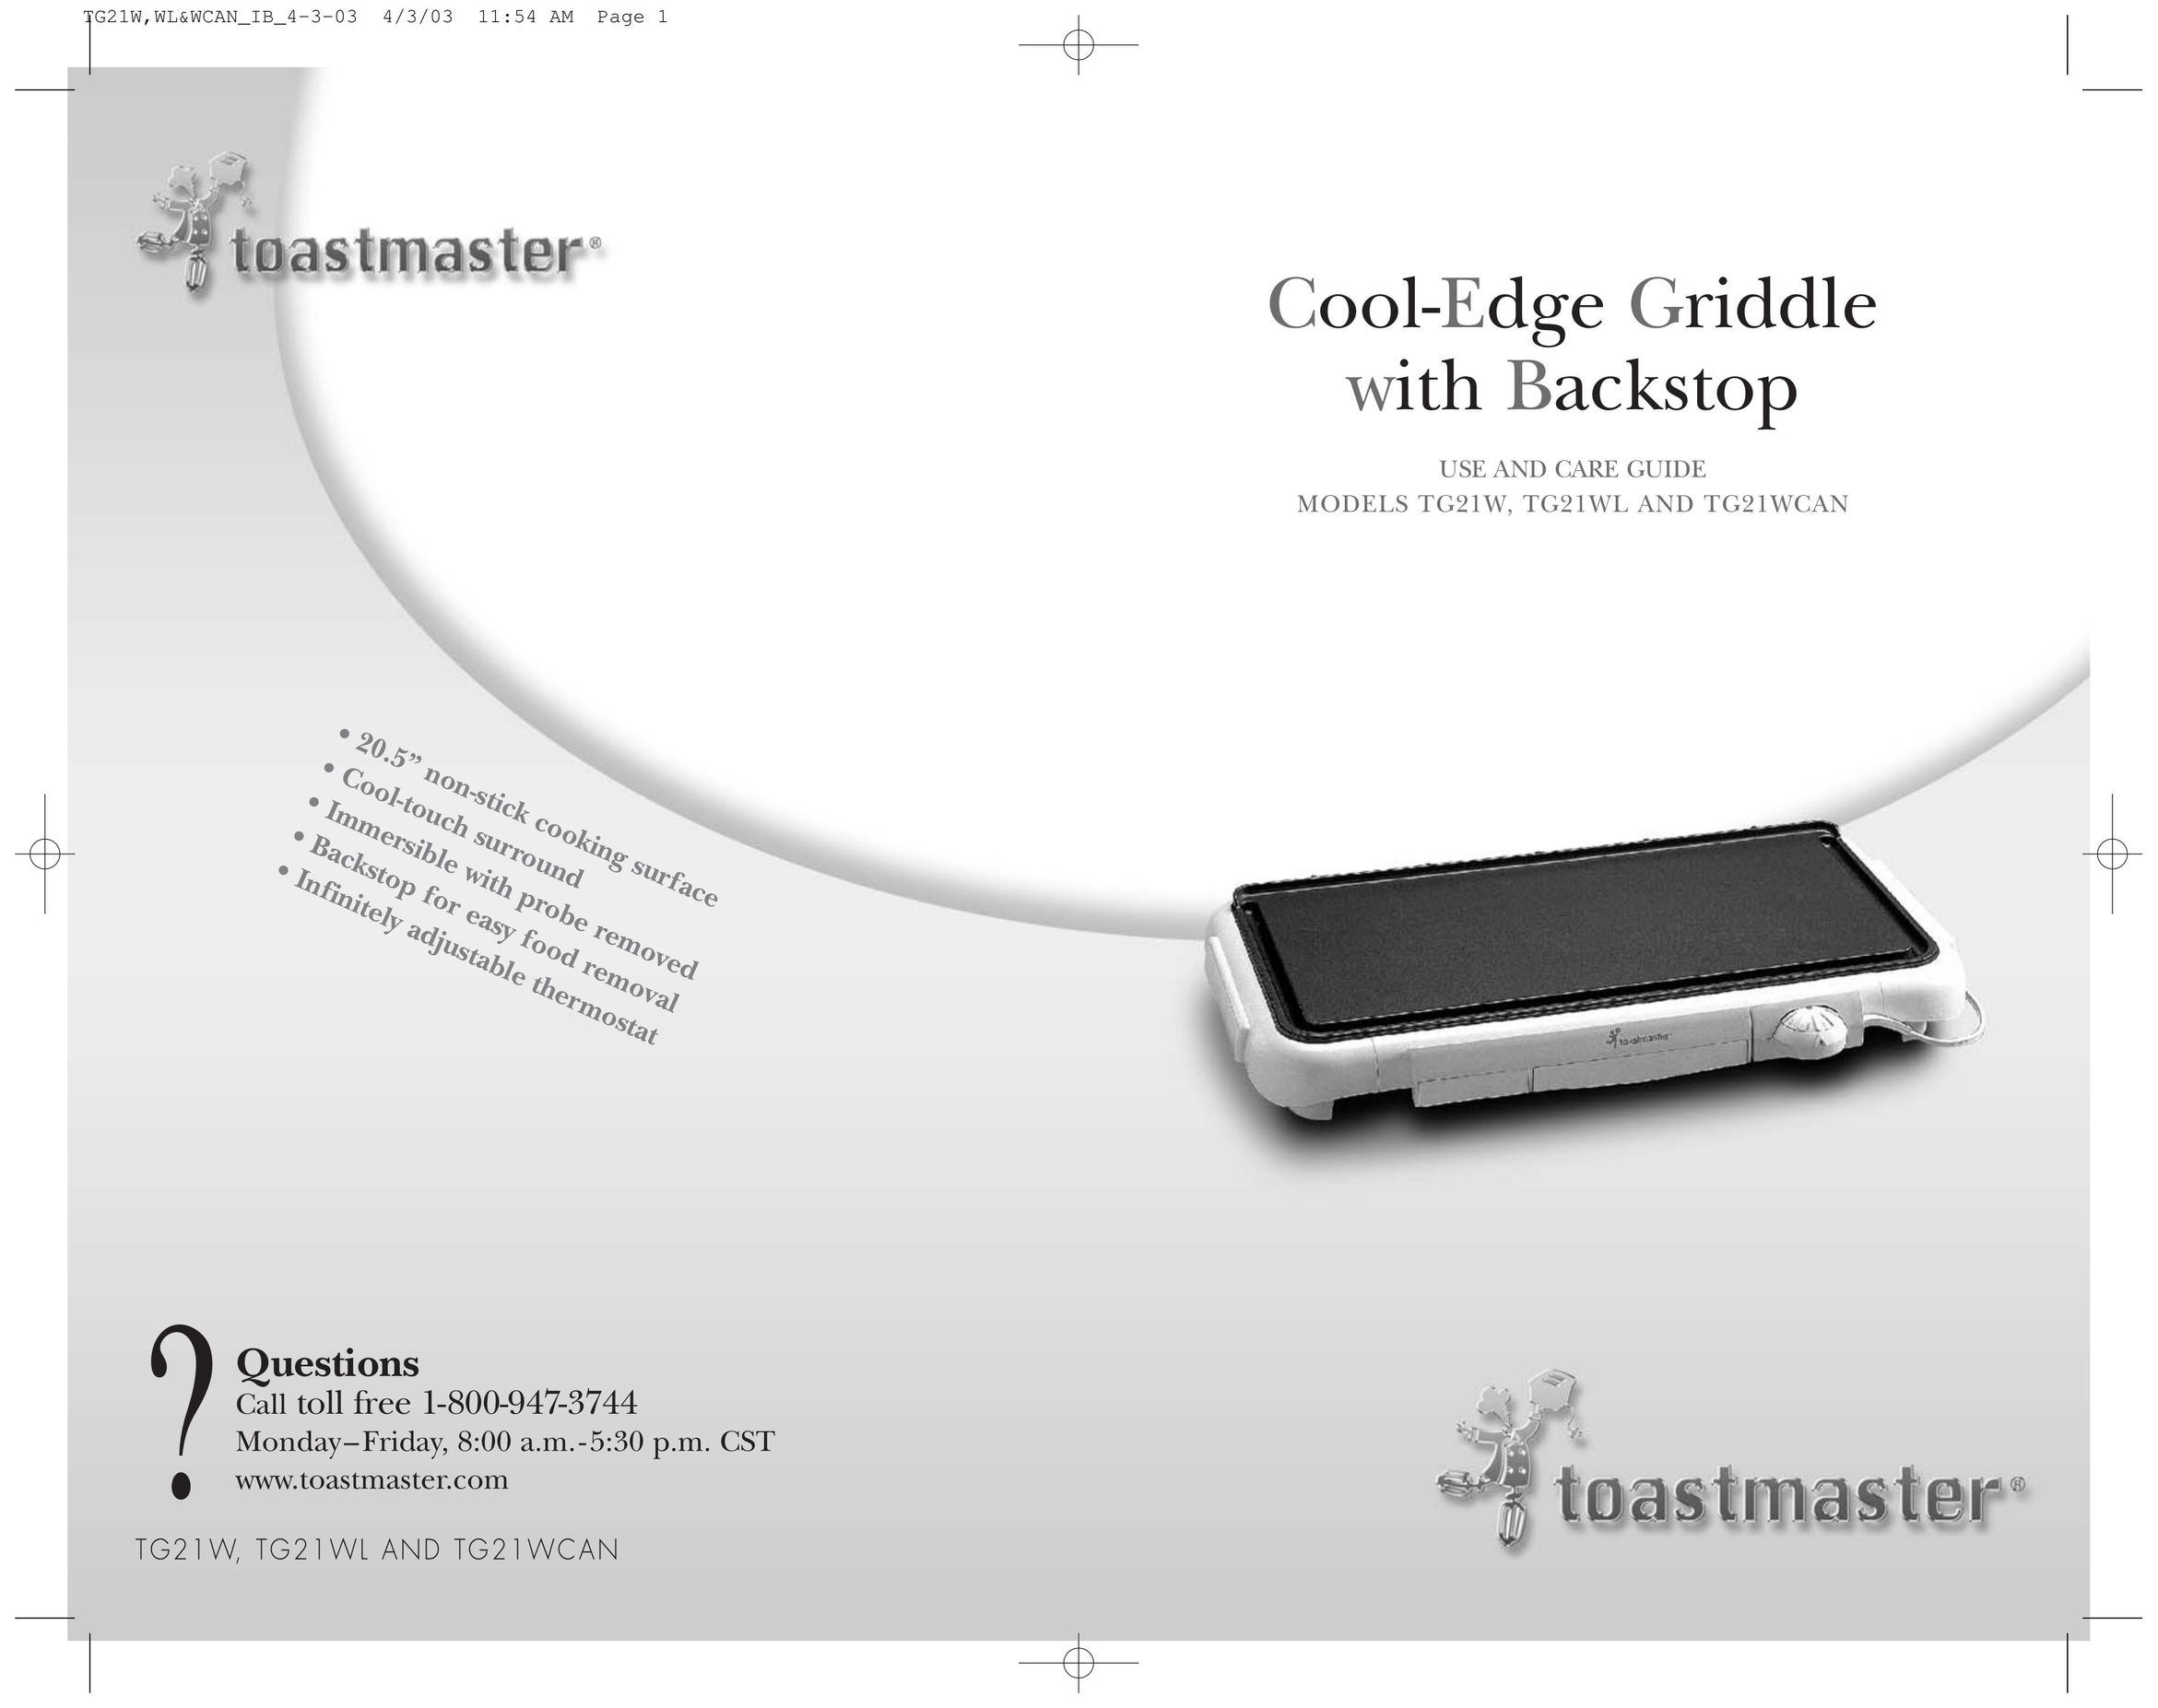 Toastmaster TG21WL, TG21WCAN Griddle User Manual